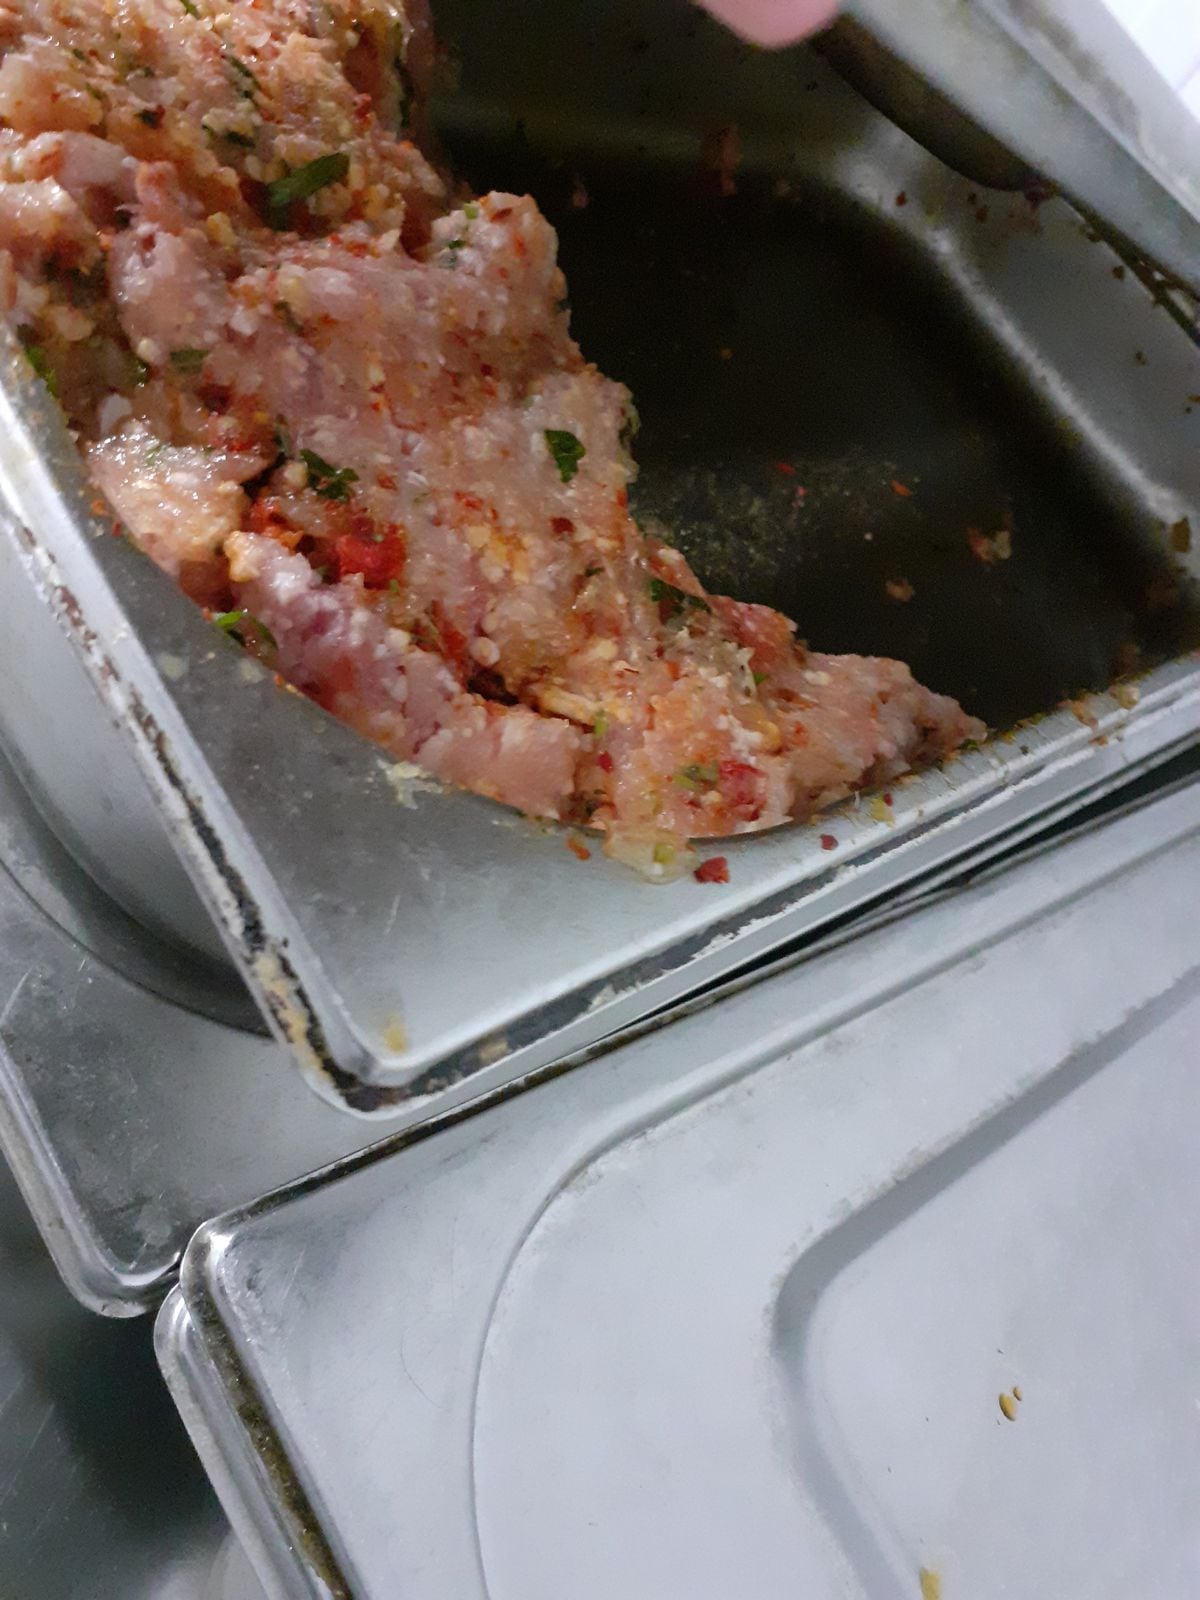 Seasoned/flavoured raw meat in a container at the restaurant